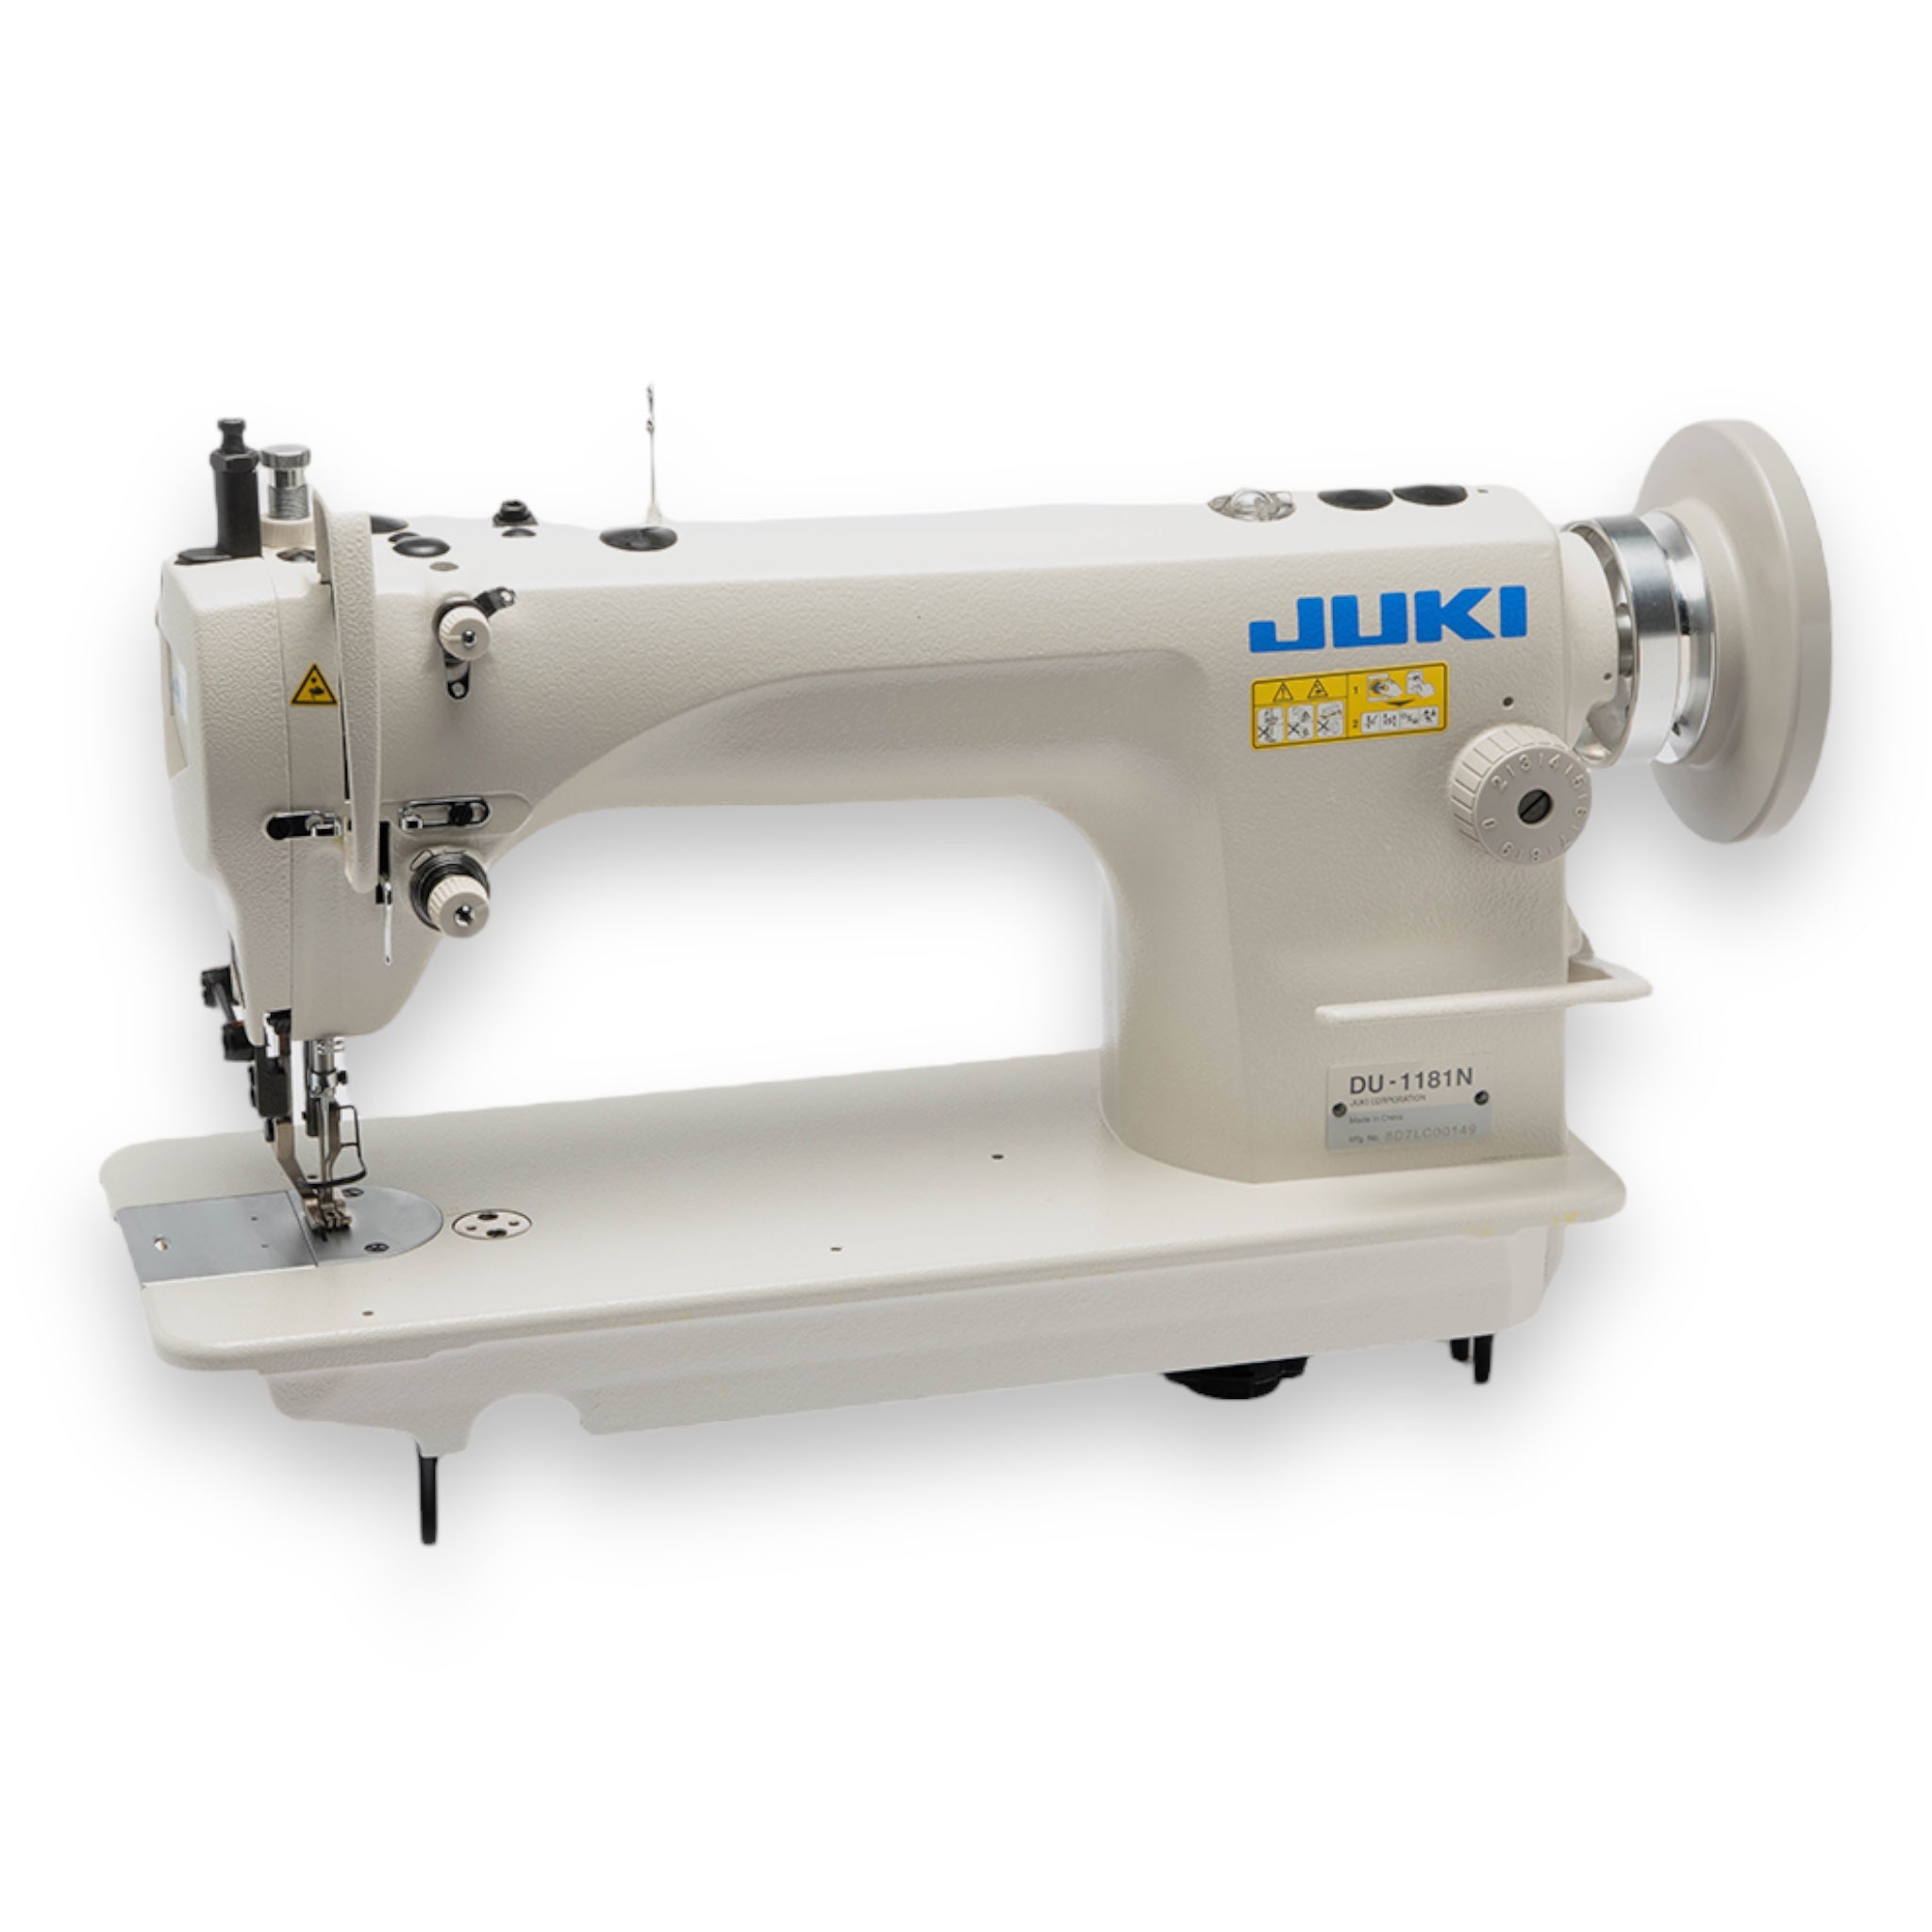 JUKI DU1181N Single Needle Top and Bottom Feed Walking Foot Sewing Machine Assembled with Servo Motor, Table and Stand Included